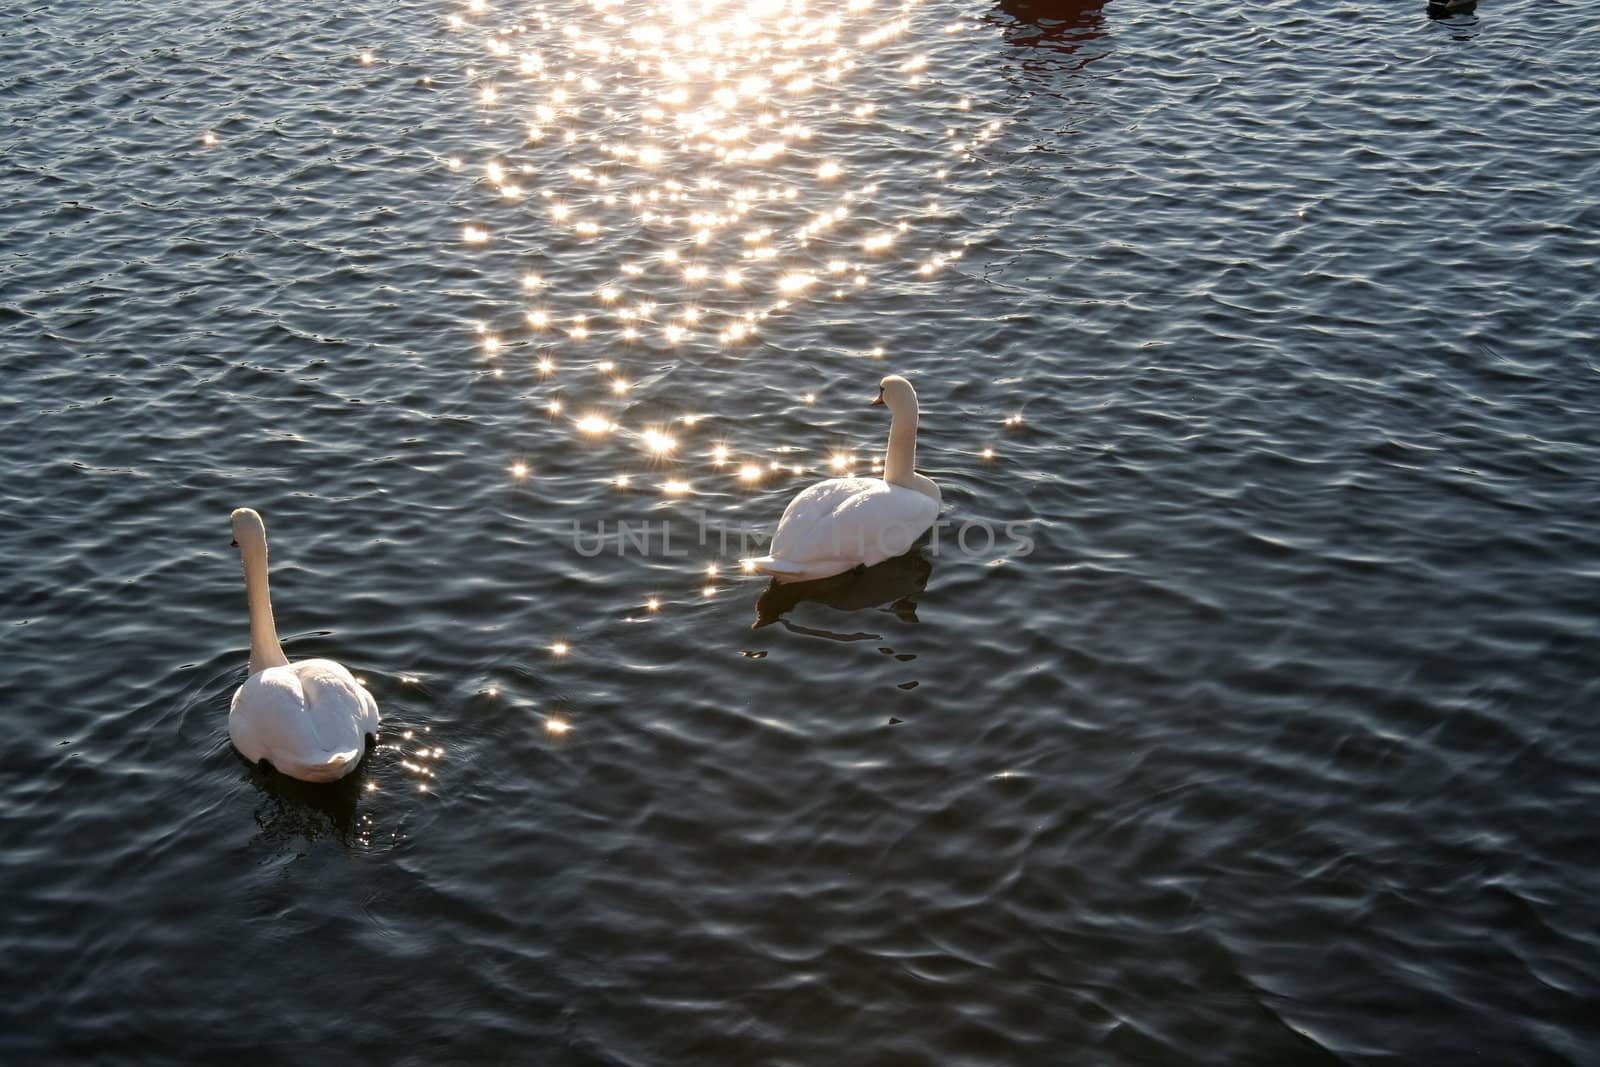 Sunset a d swan family on a lake